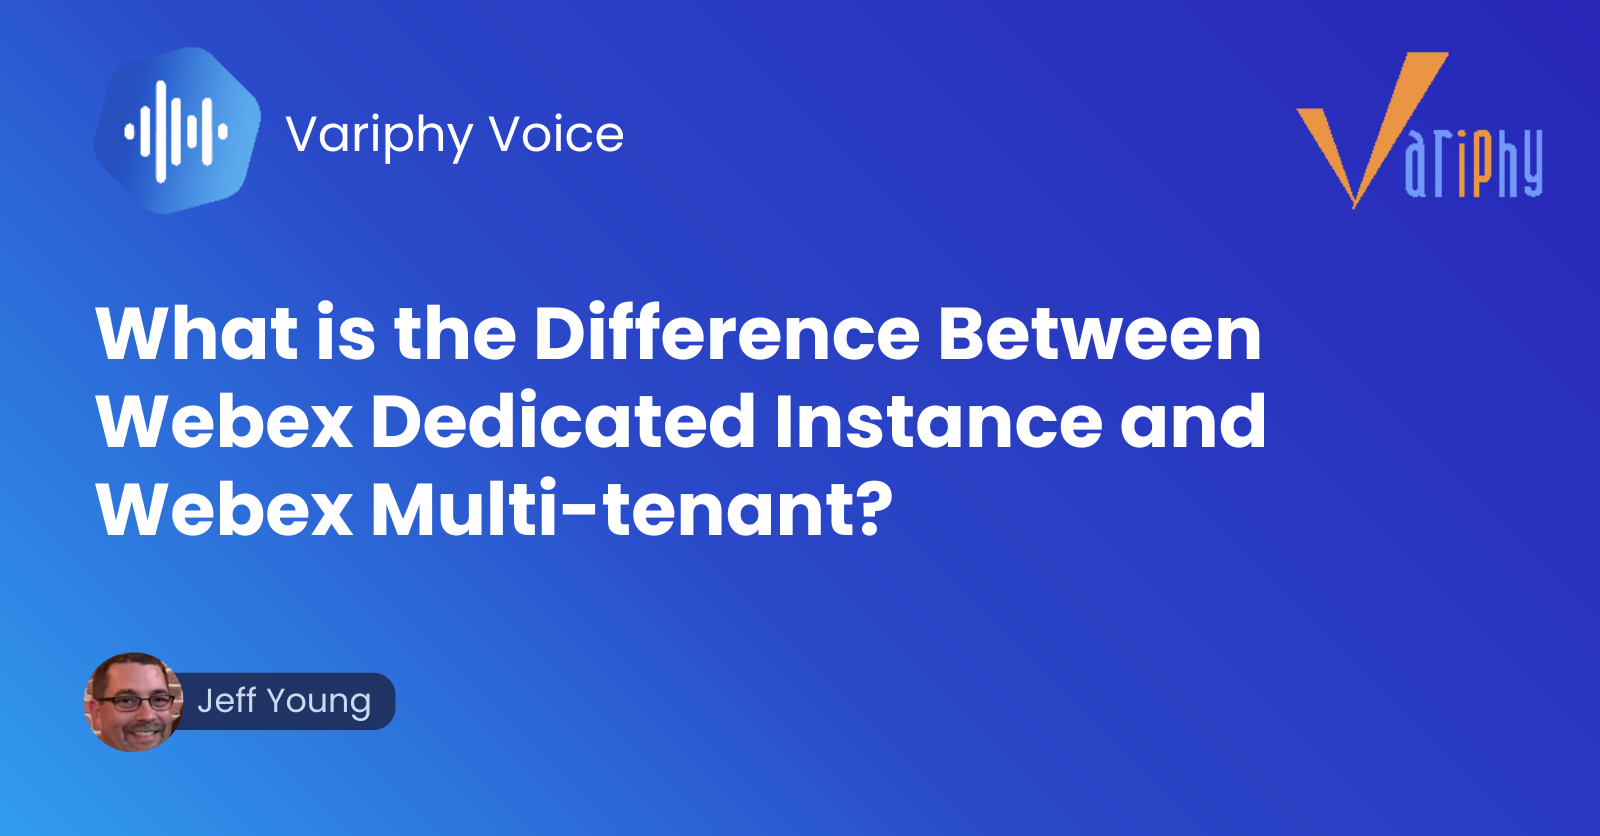 What is the Difference Between Webex Dedicated Instance and Webex Multi-tenant